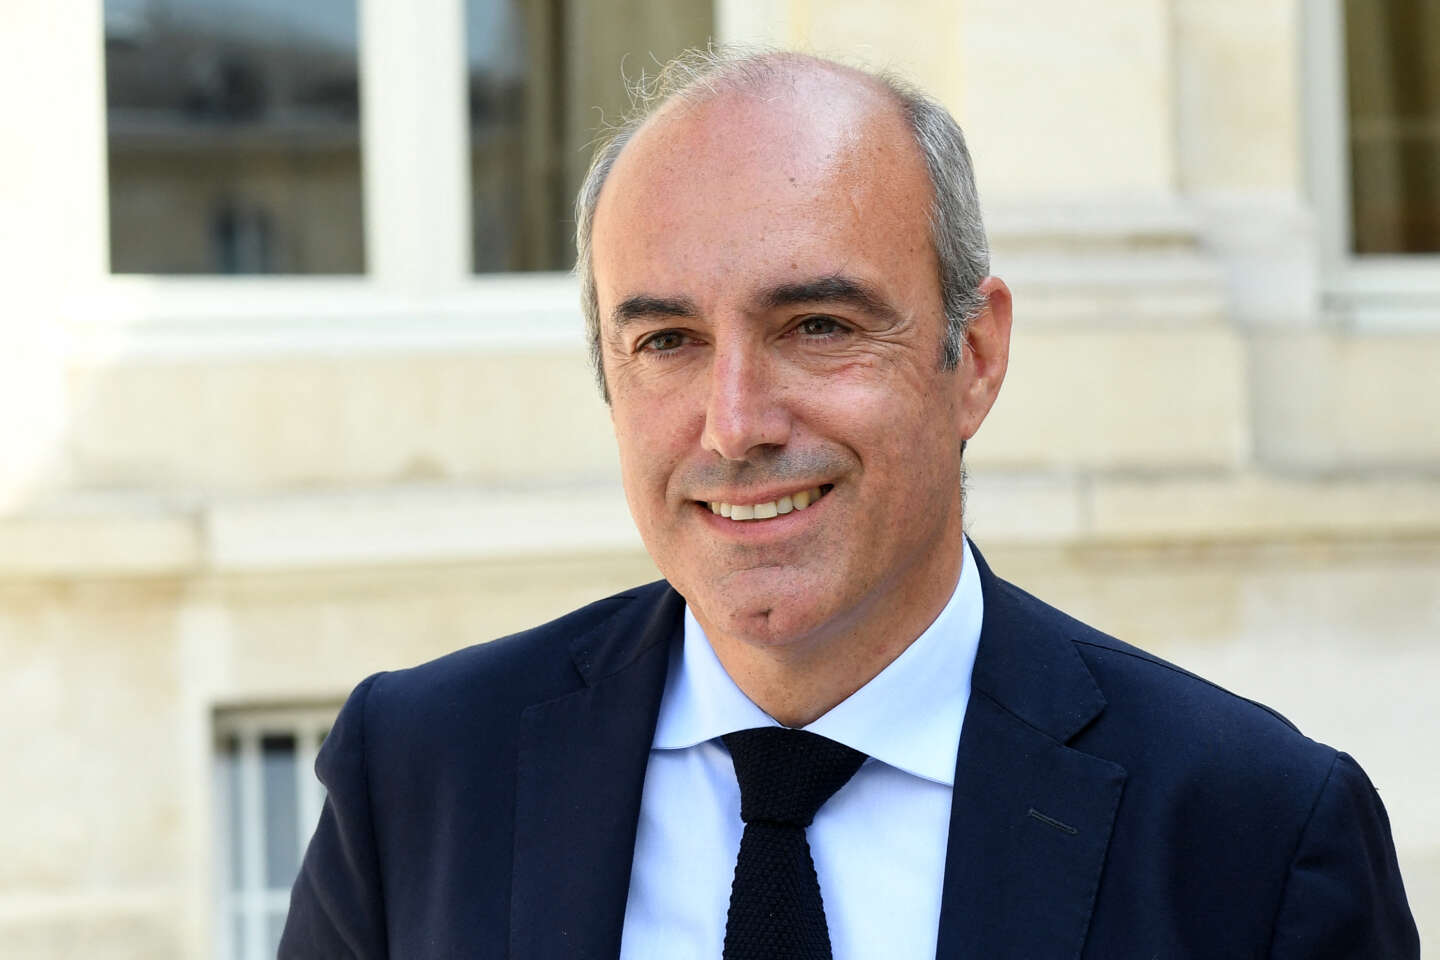 Olivier Marleix, a “hard” at the head of the LR group in the National Assembly